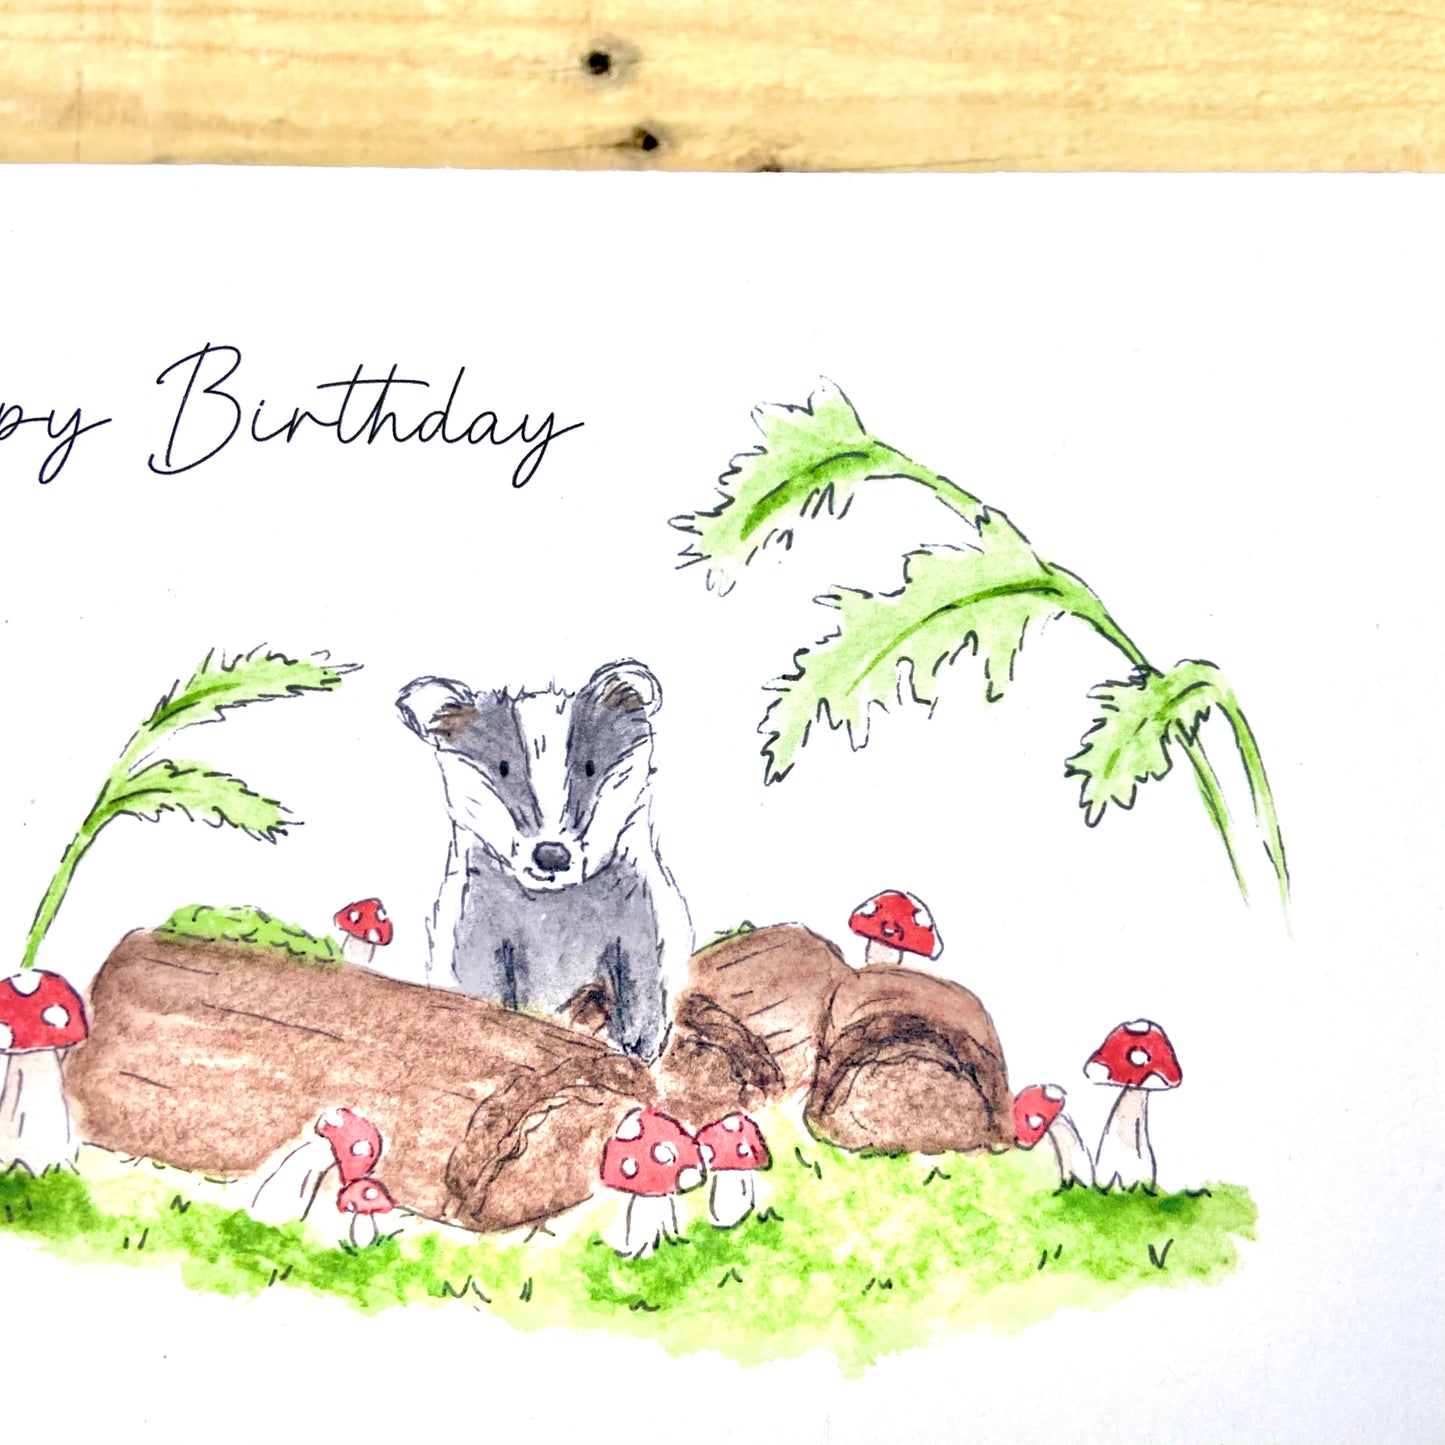 Bob the Badger in the Woods Birthday Card